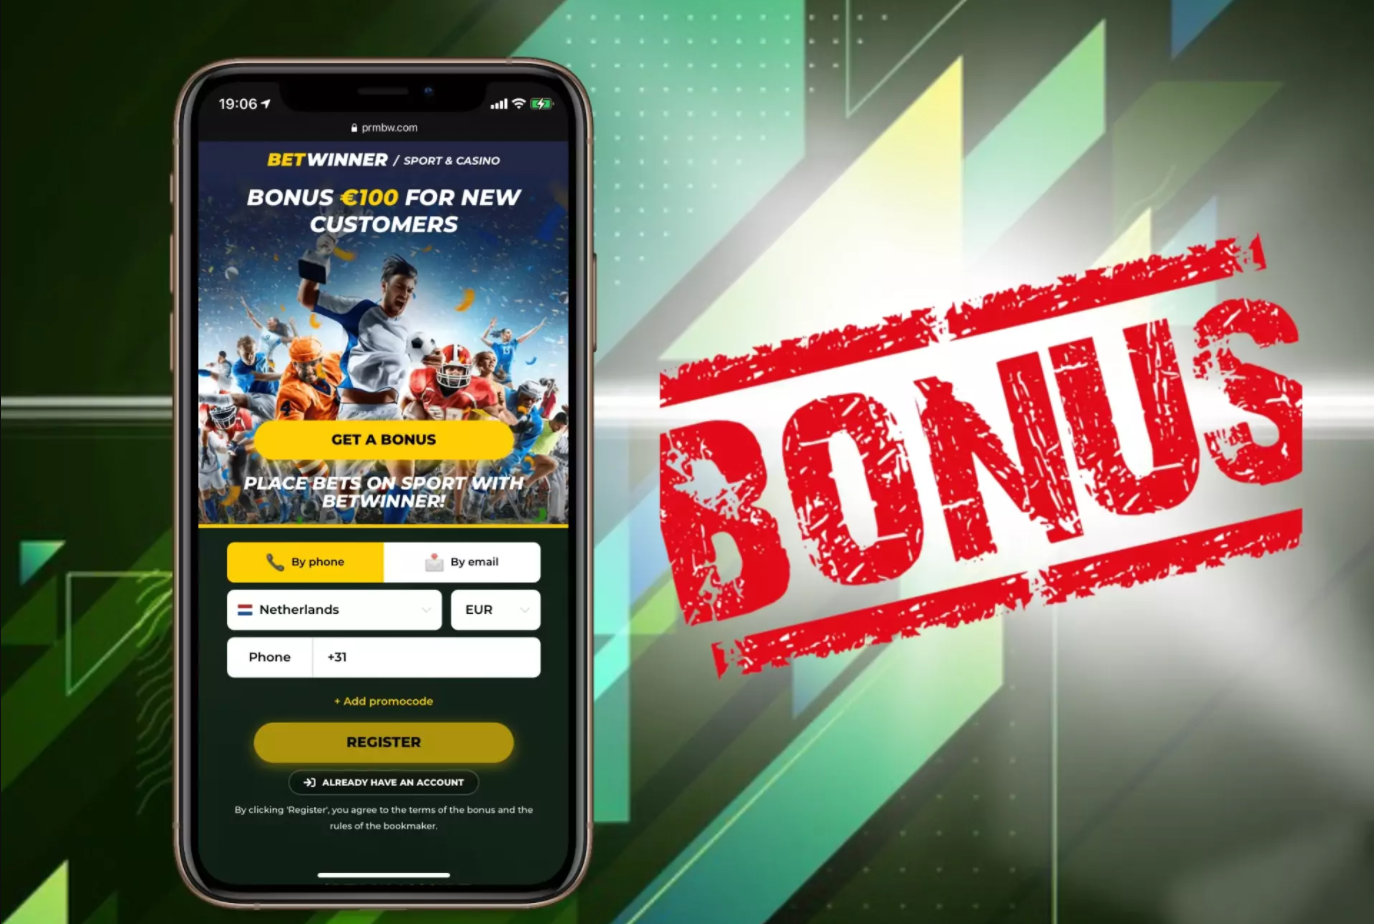 How To Lose Money With Bonos Betwinner Bolivia